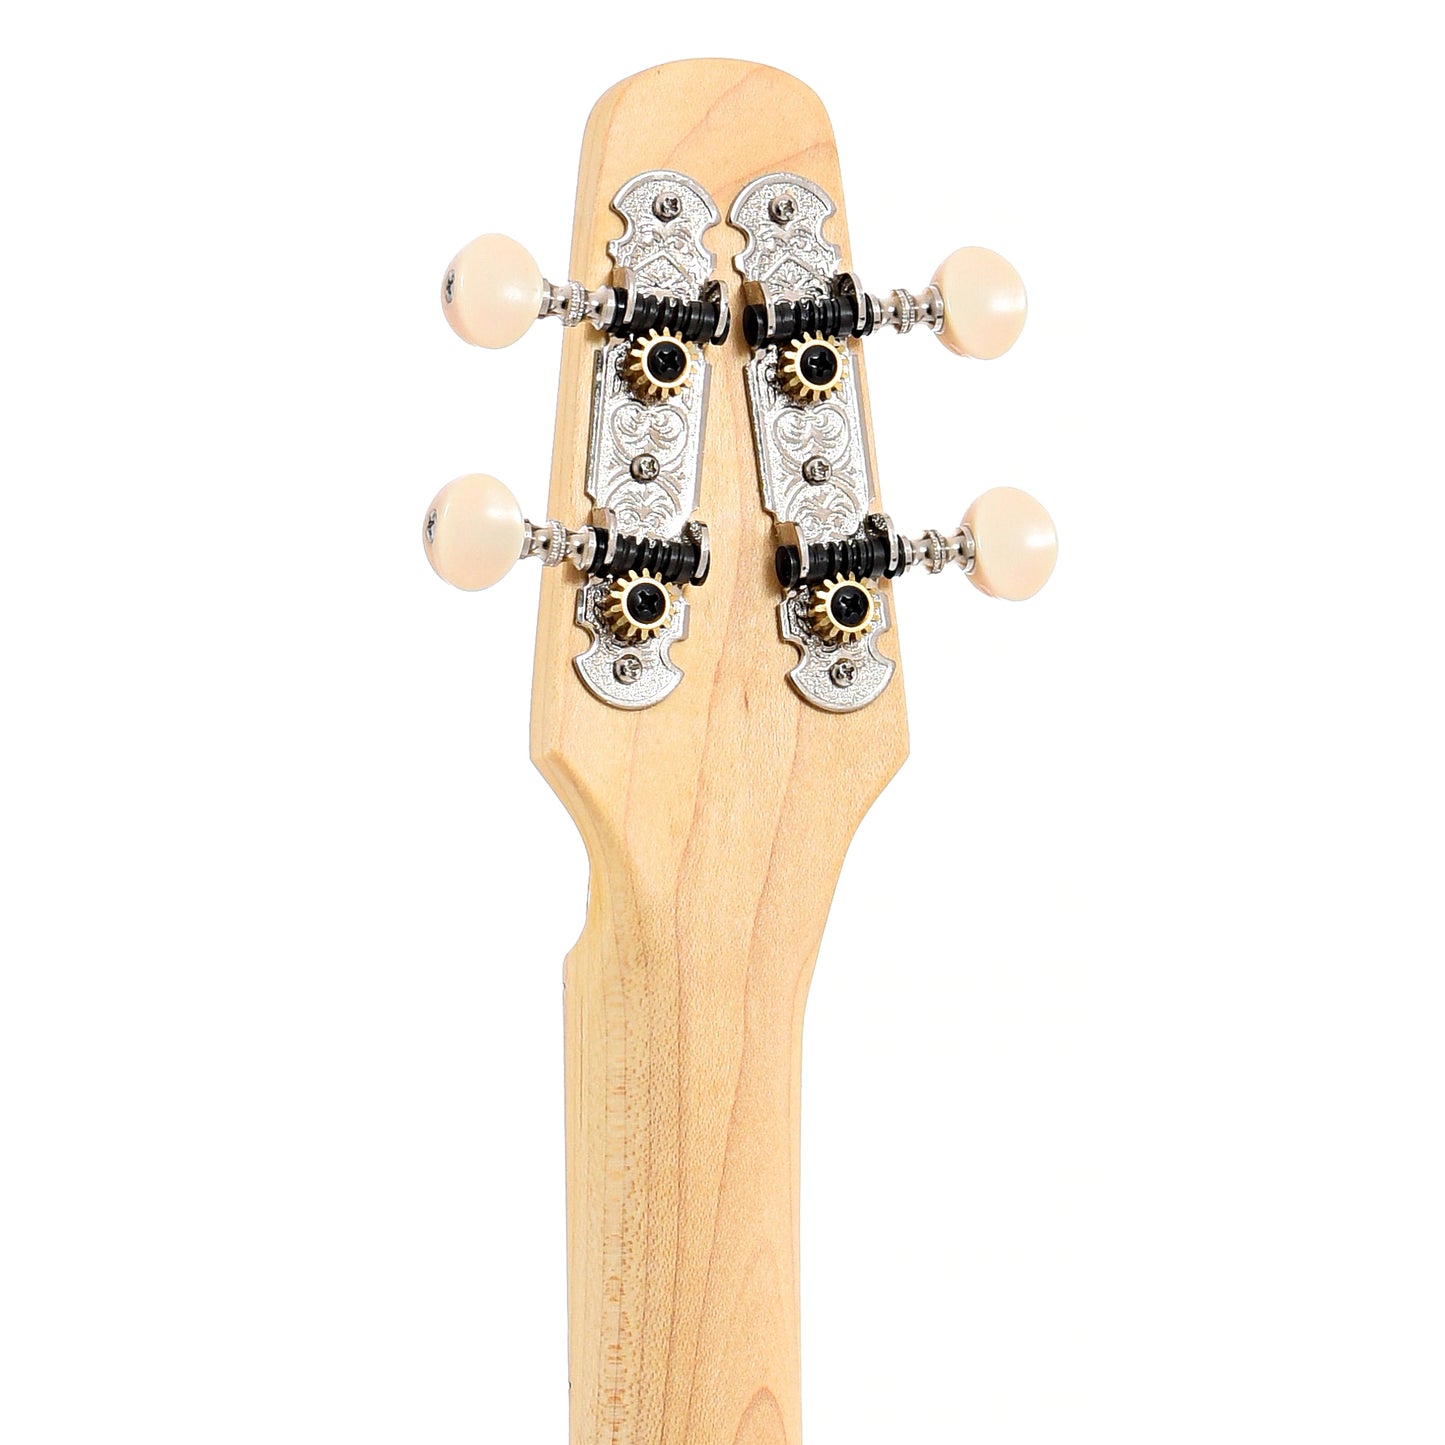 Back headstock of Seagull M4 "Merlin" 4-String Diatonic Acoustic Instrument with Pickup